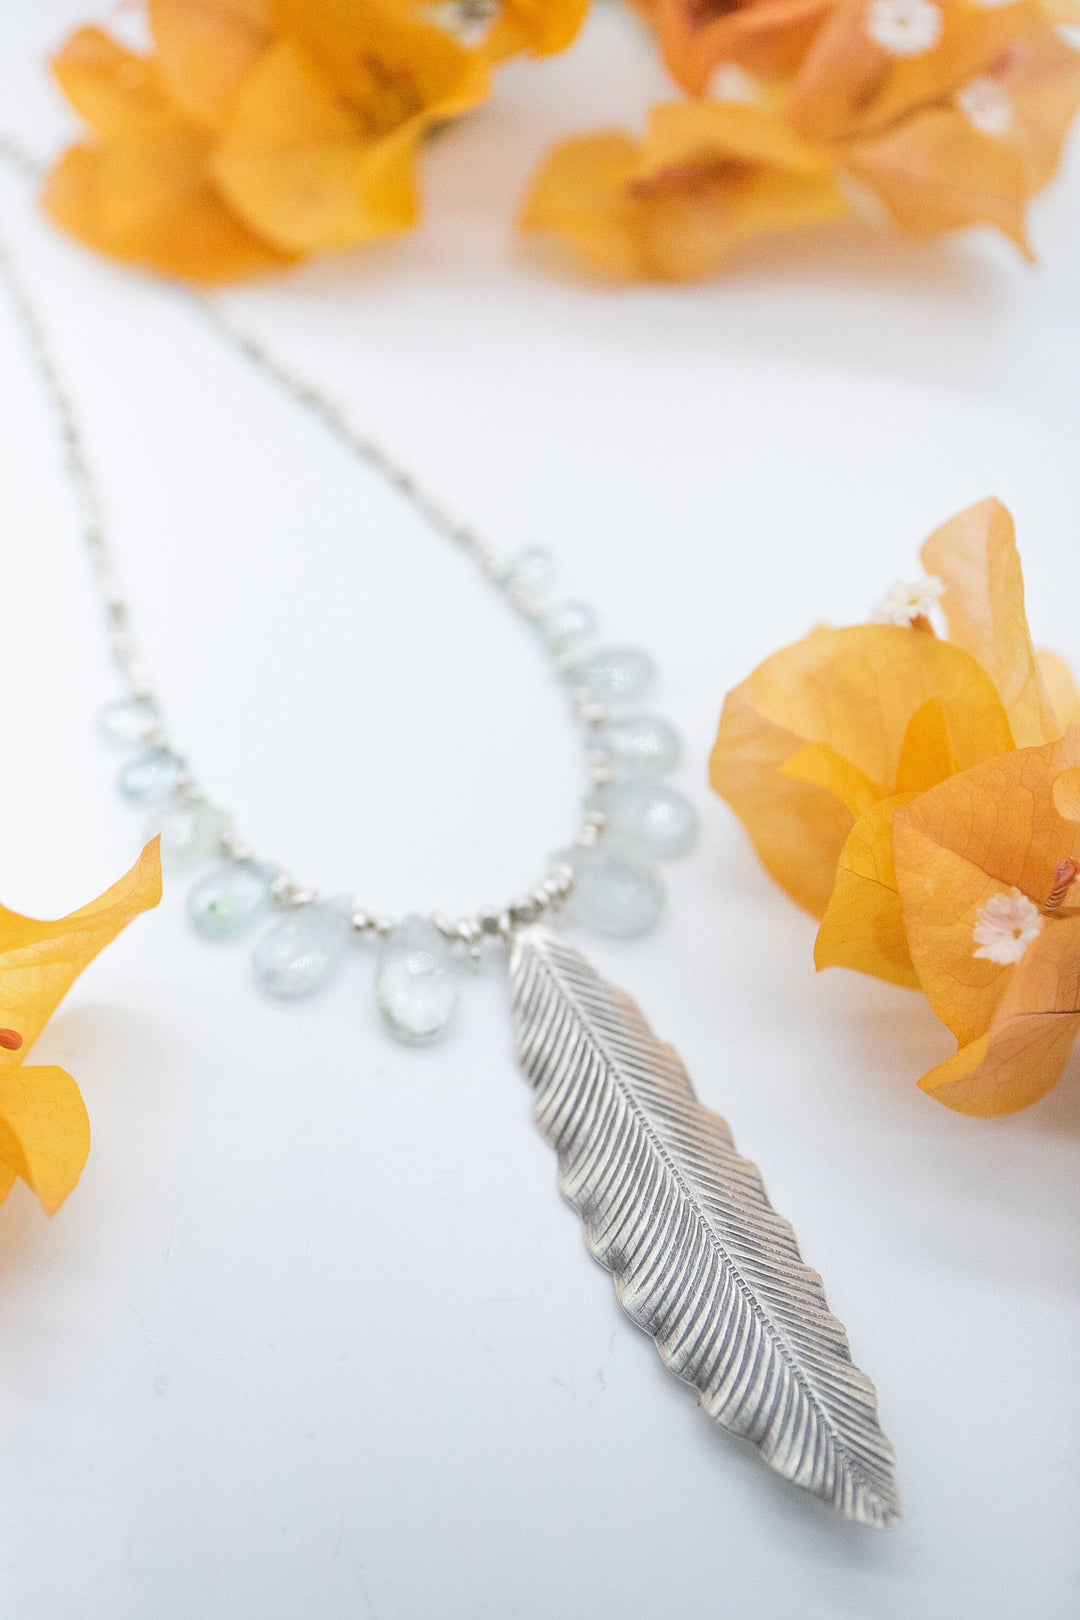 Faceted Teardrop Aquamarine Necklace with Thai Hill Tribe Silver Beads and Leaf Pendant